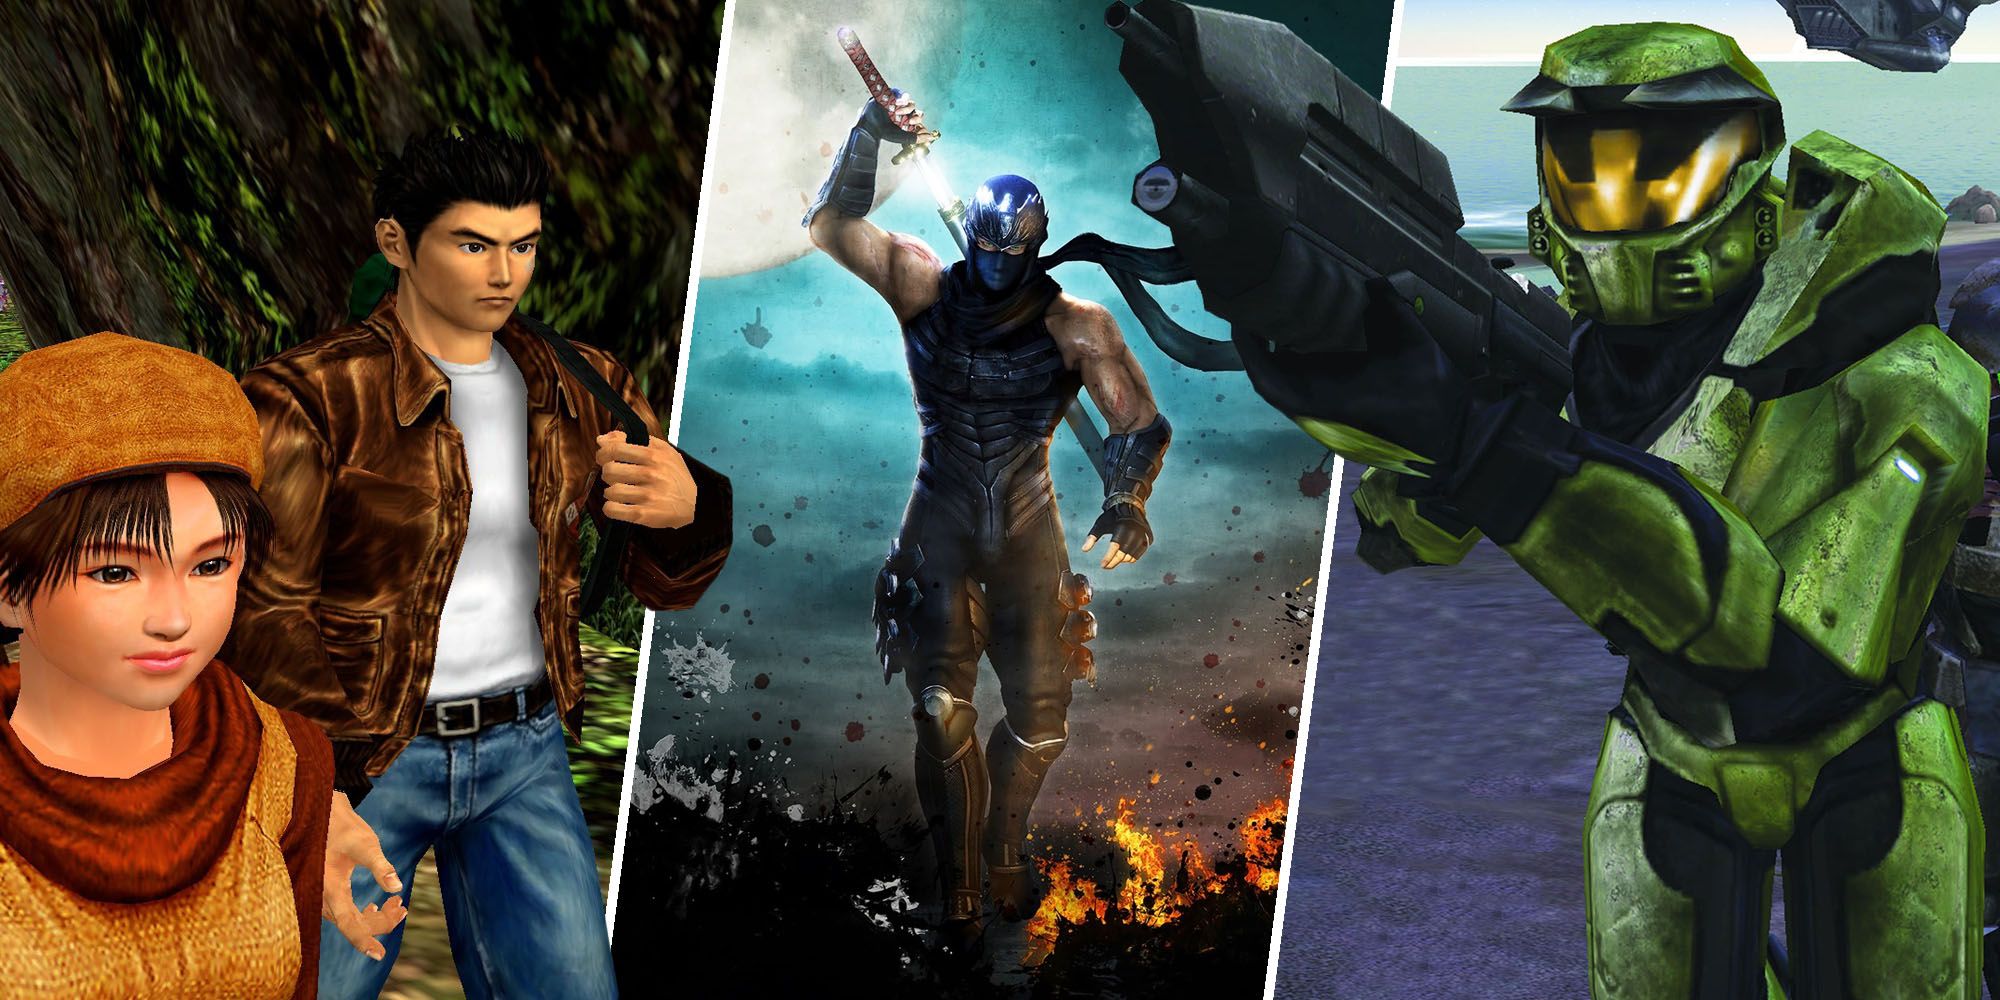 The 10 Best Exclusive Xbox Games Ever Made (According To Metacritic)